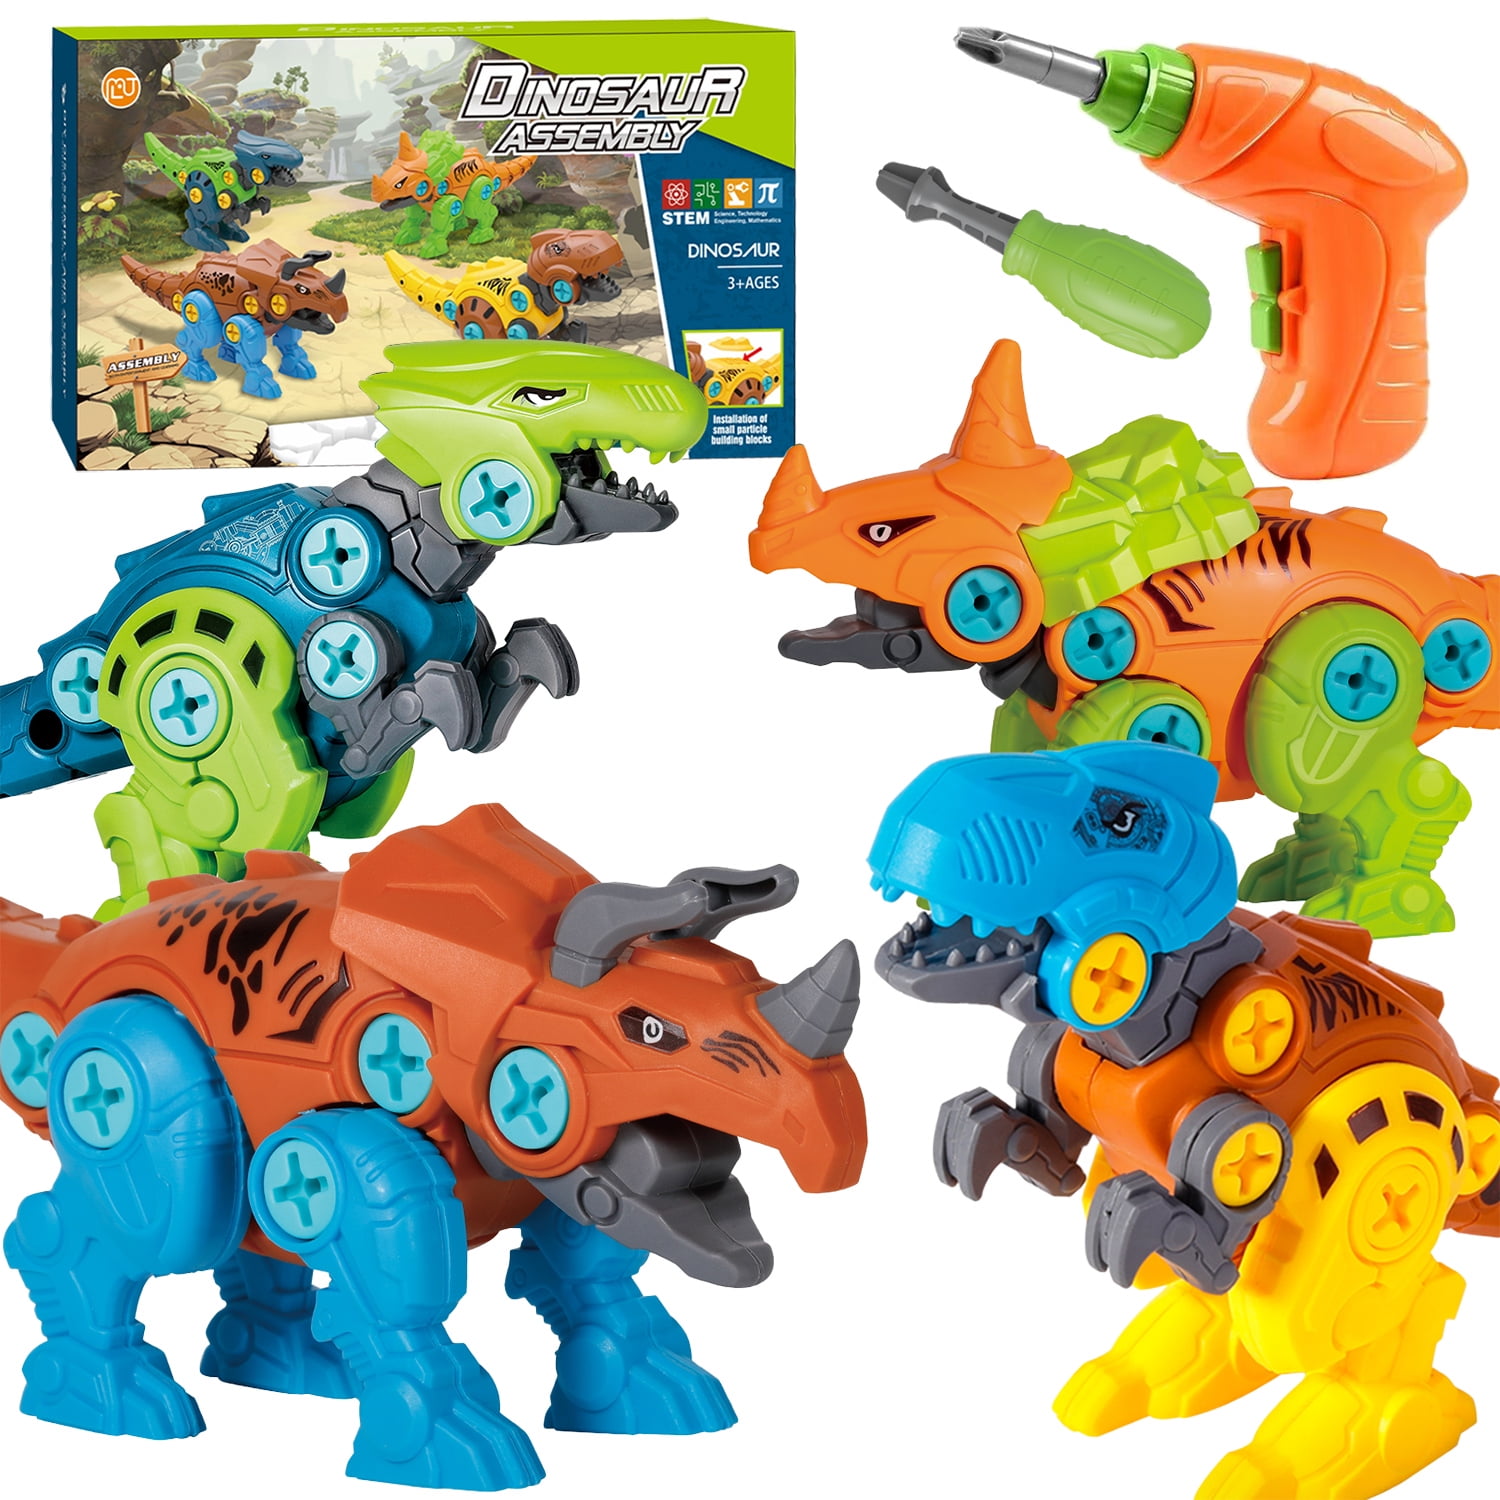 Construction Play Kit Take Apart Toys with Electric Drill VNVDFLM 3 Pcs Take Apart Dinosaur Toys for Kids Age 3 4 5 6 7 L-r3, Red, Green, Brown Building Toy Set Learning Gifts for Boys and Girls